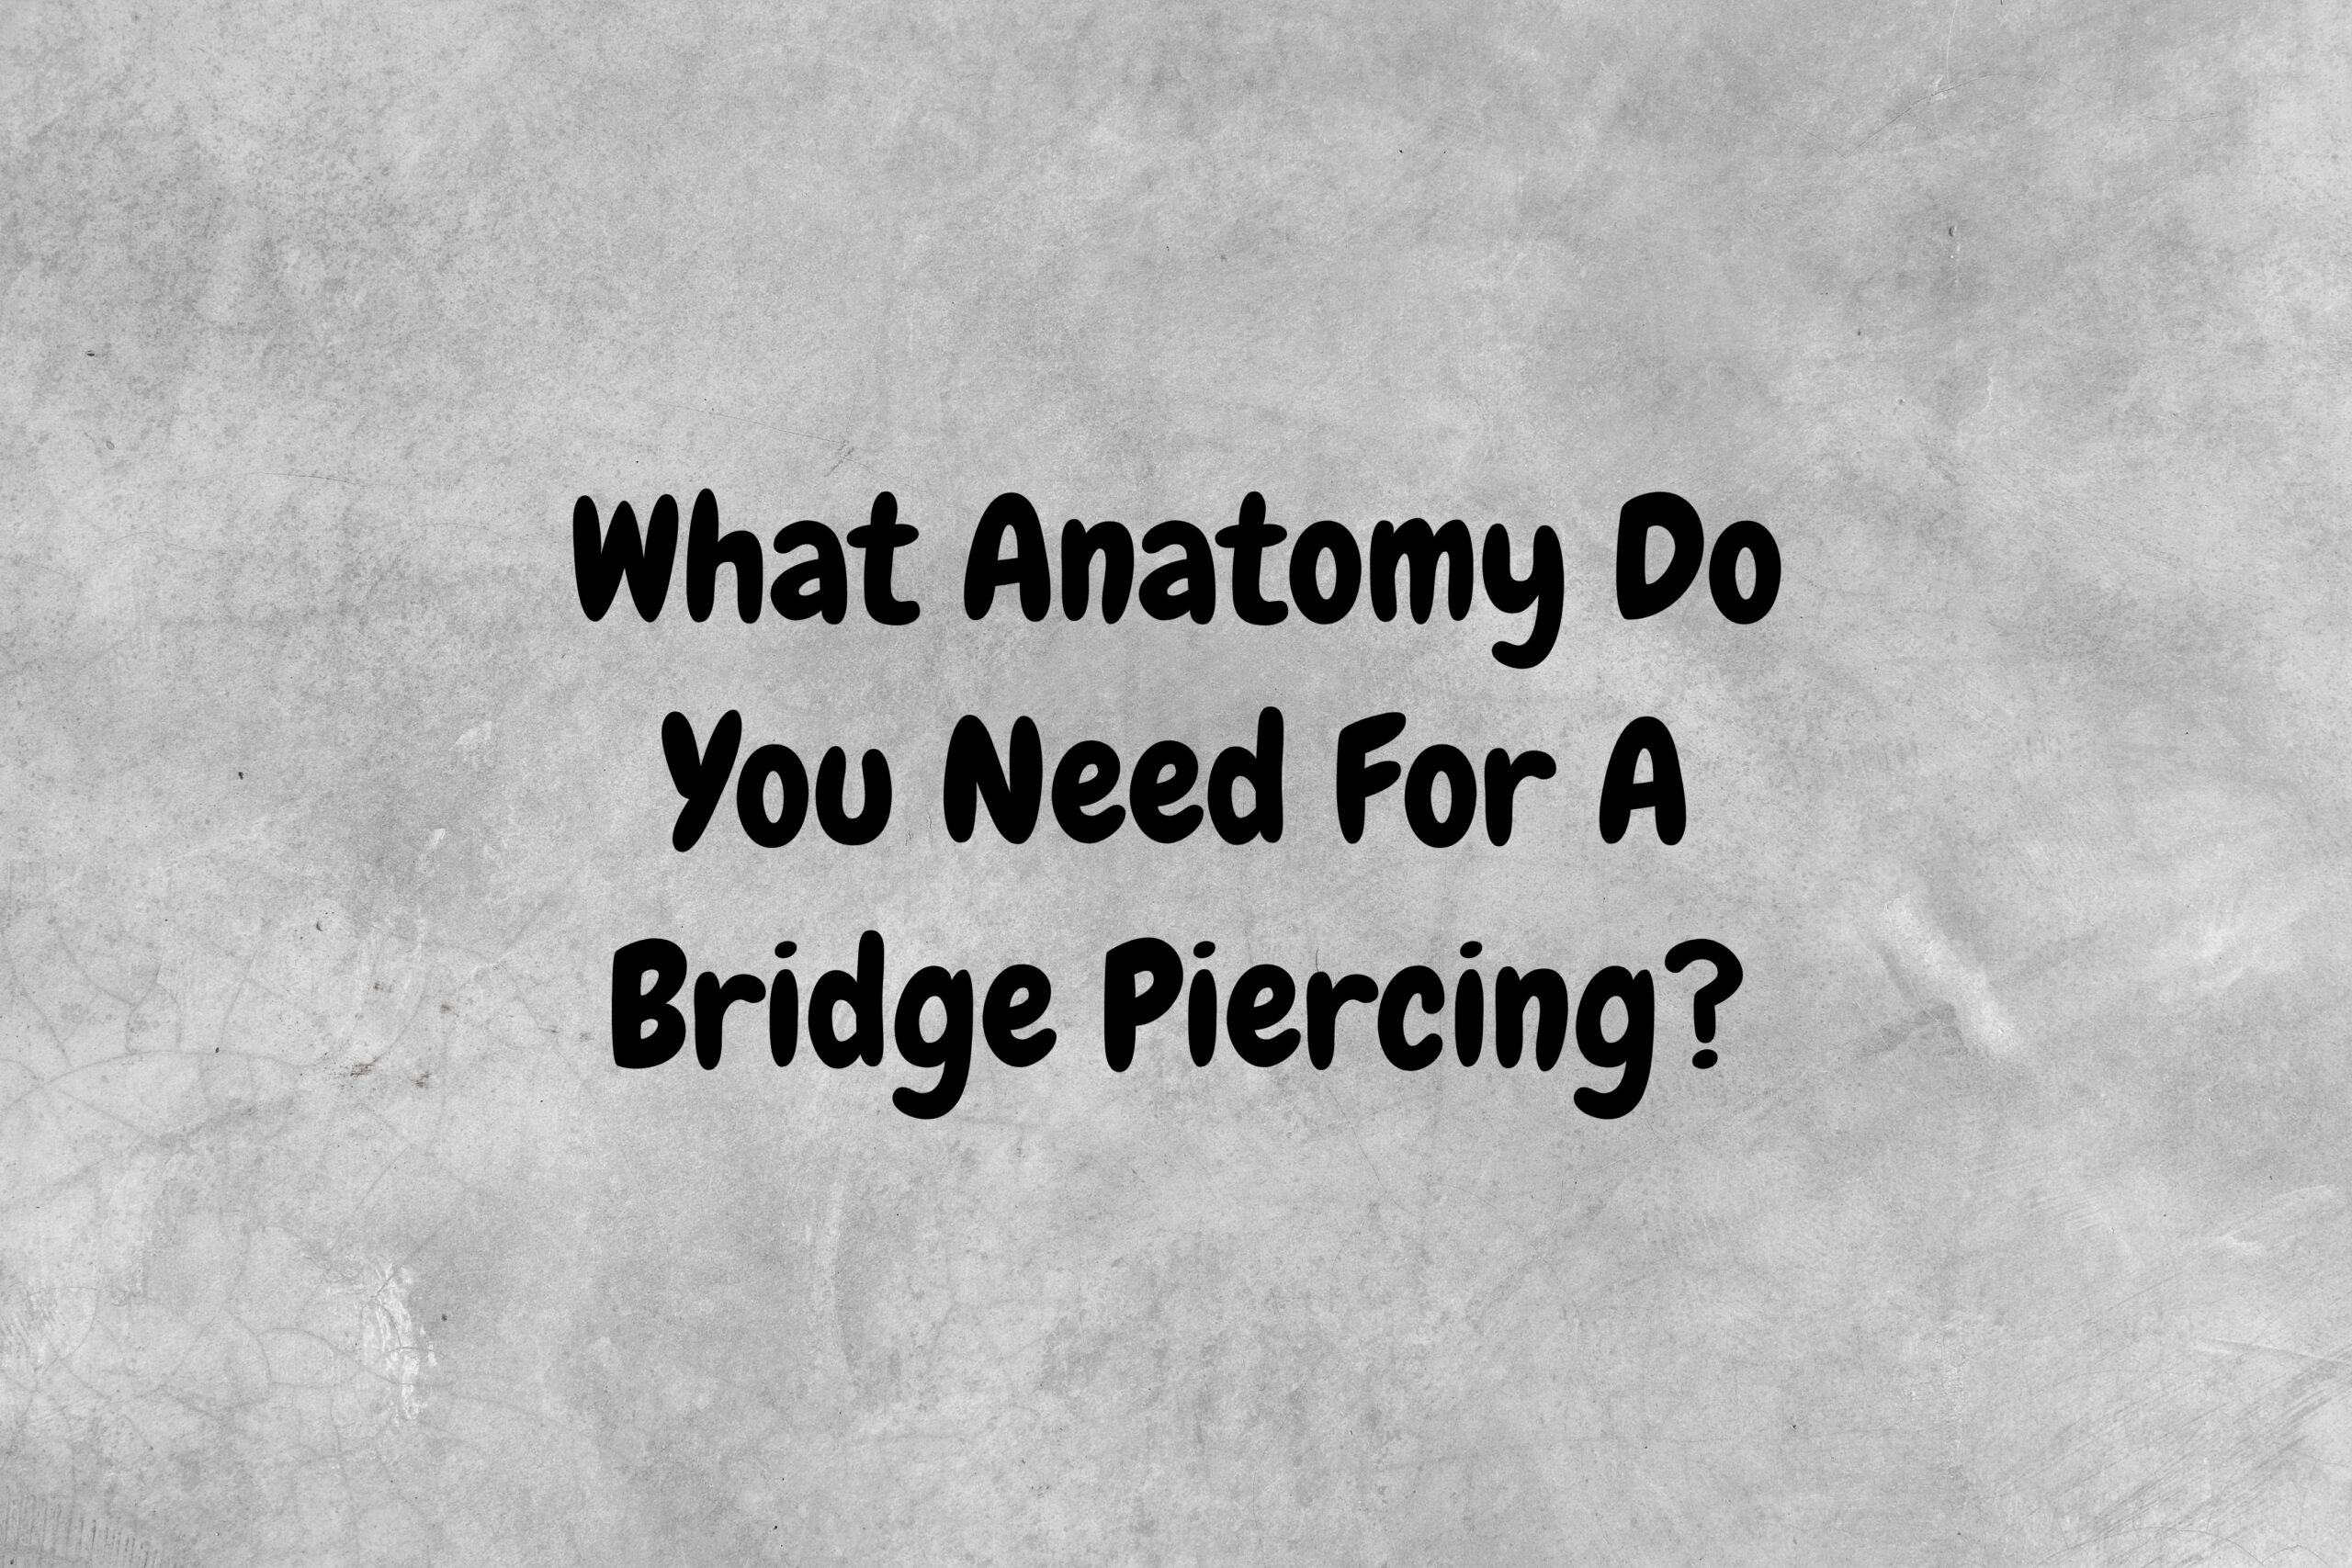 An image with a gray background and black text asking the question, "What anatomy do you need for a bridge piercing?"